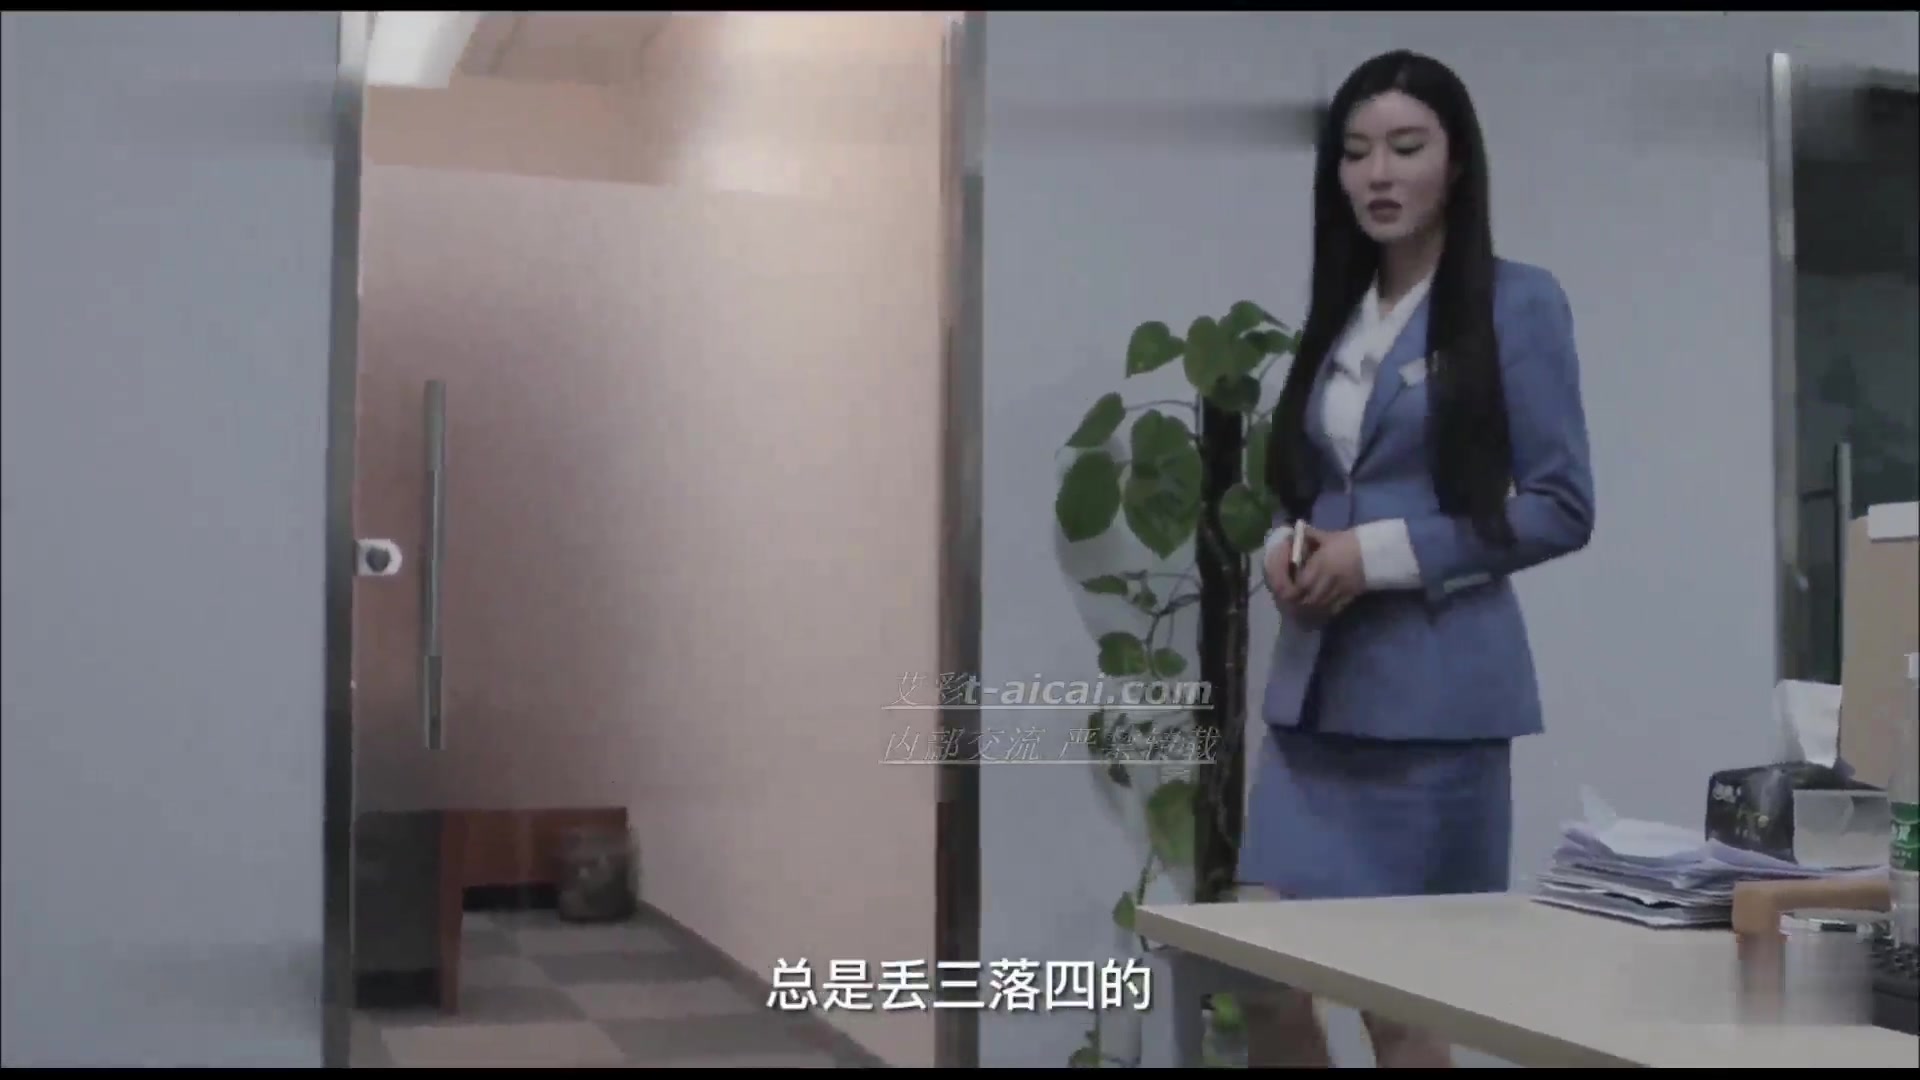 Secret Heart, TV series 2, punishing the boss who sneaked into the stockings of a female colleague